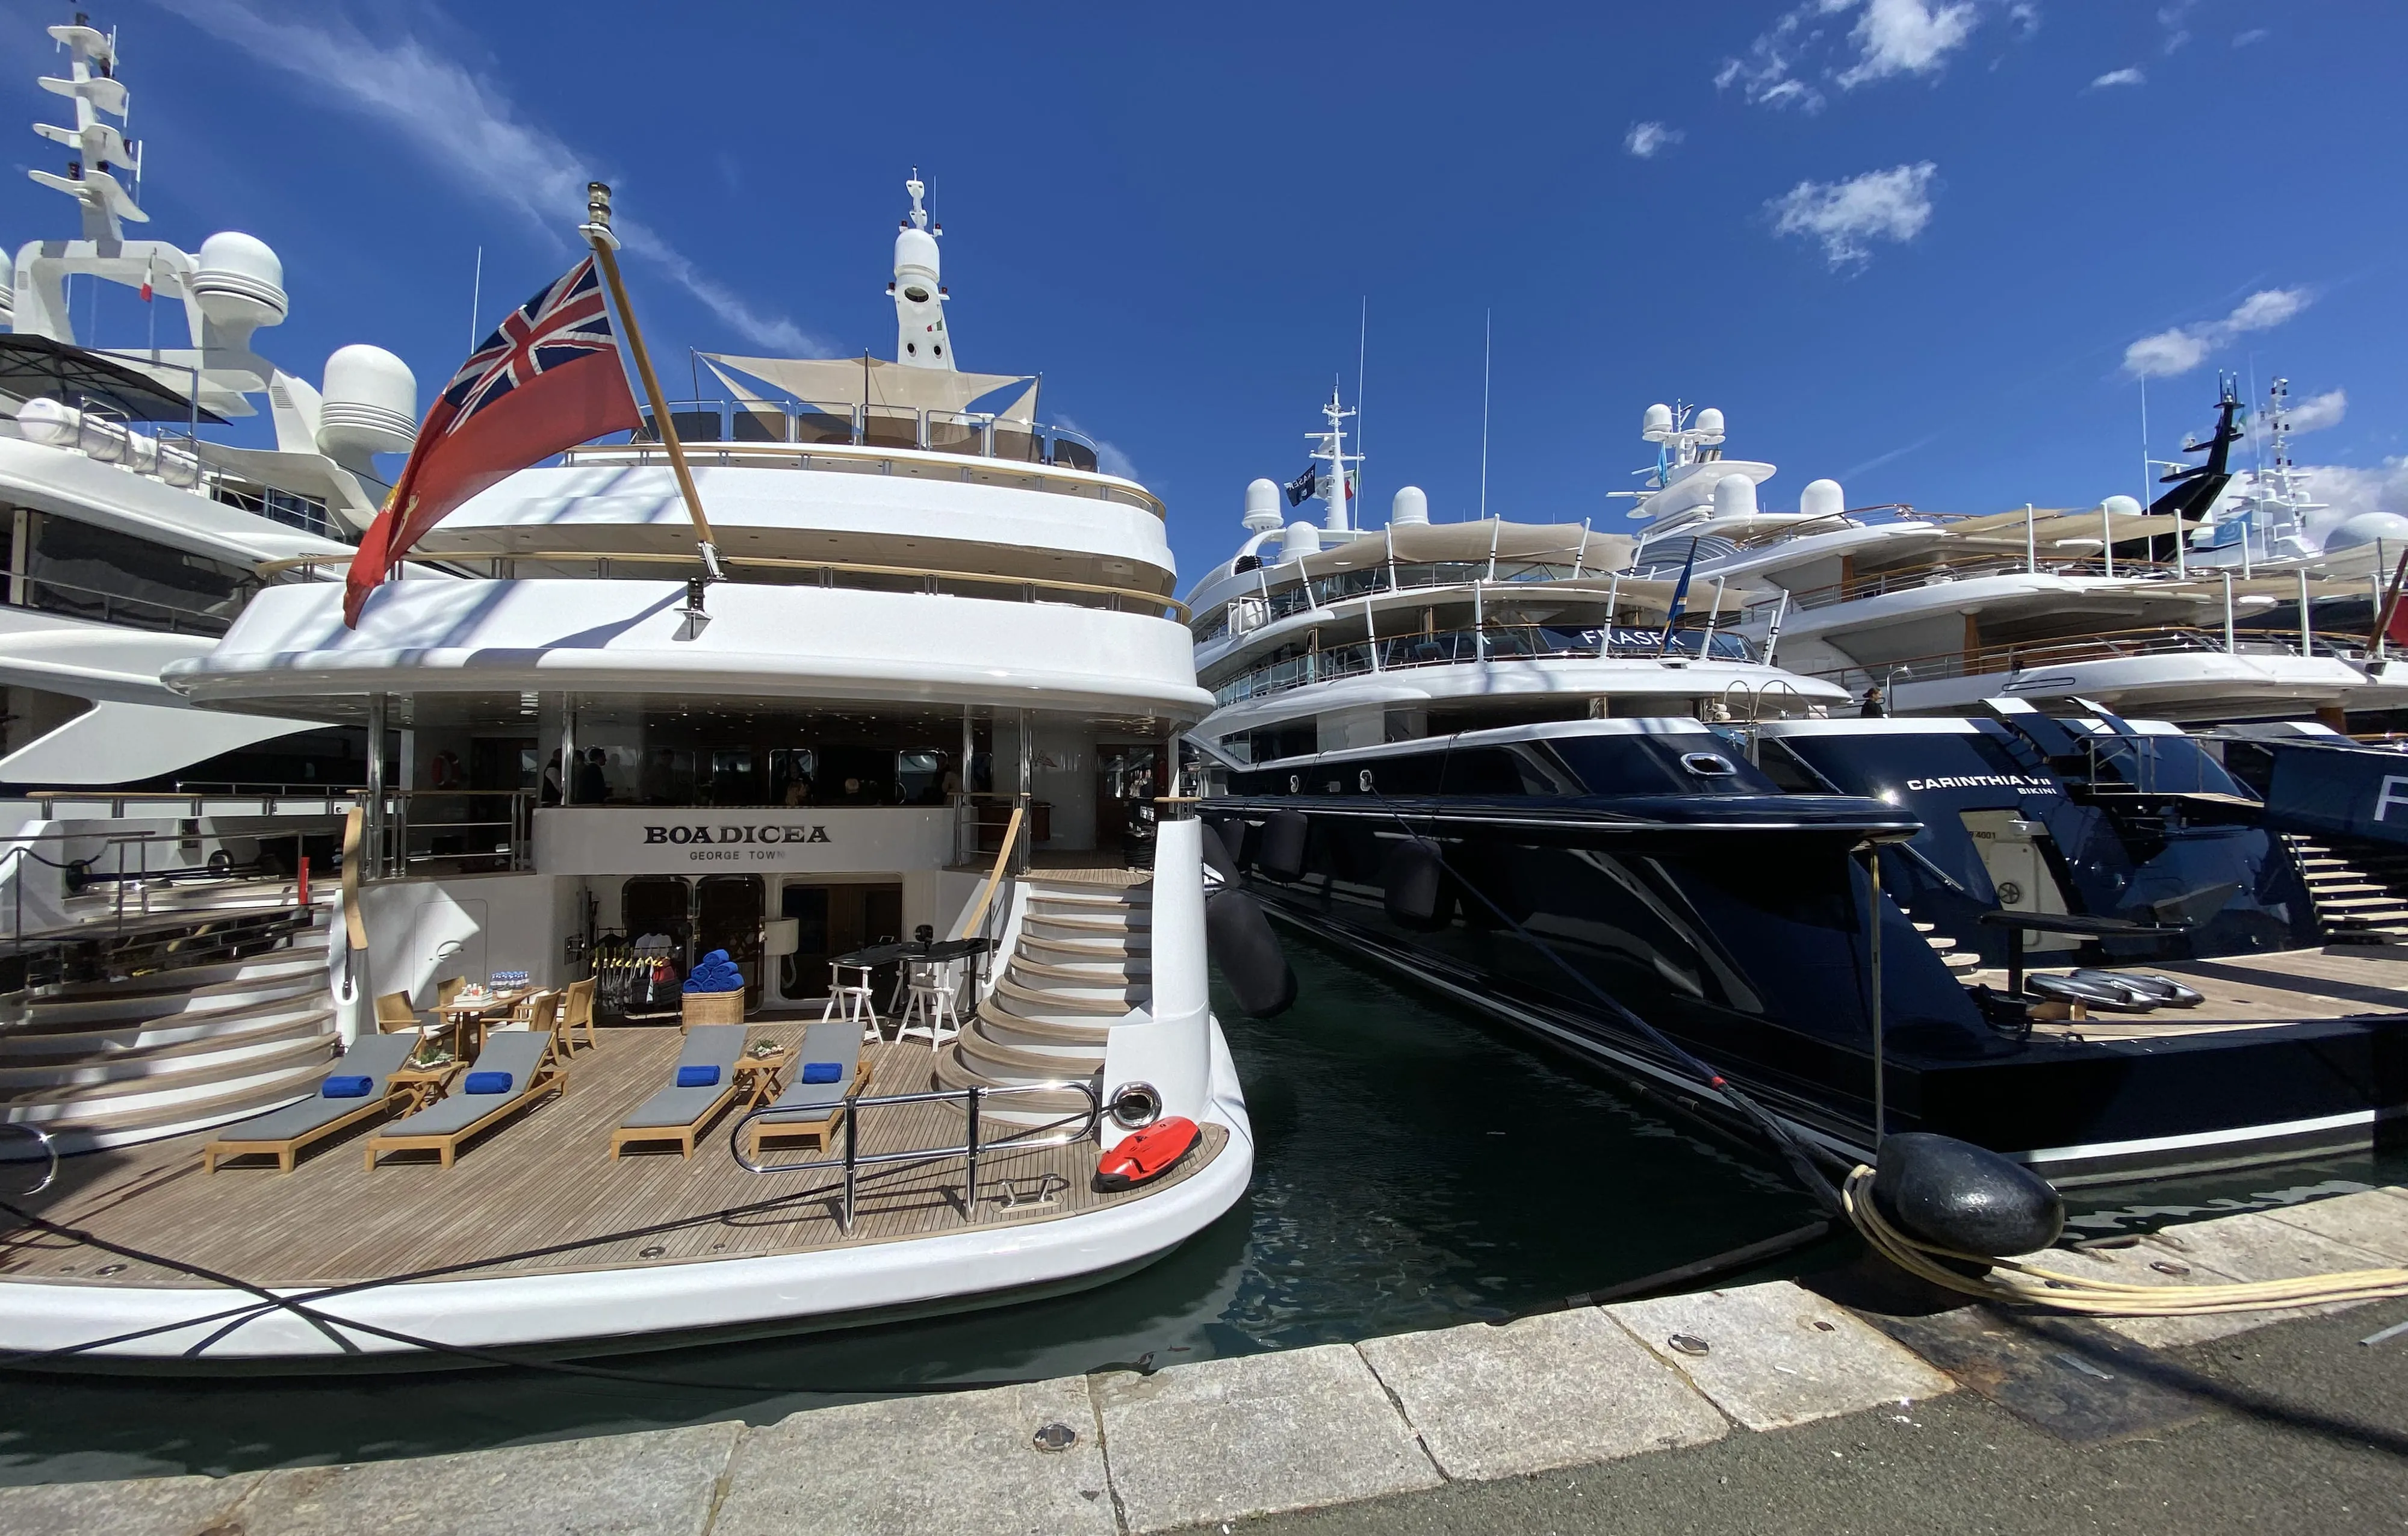 Goolets' Insights From the Best Yachting Shows in the Mediterranean